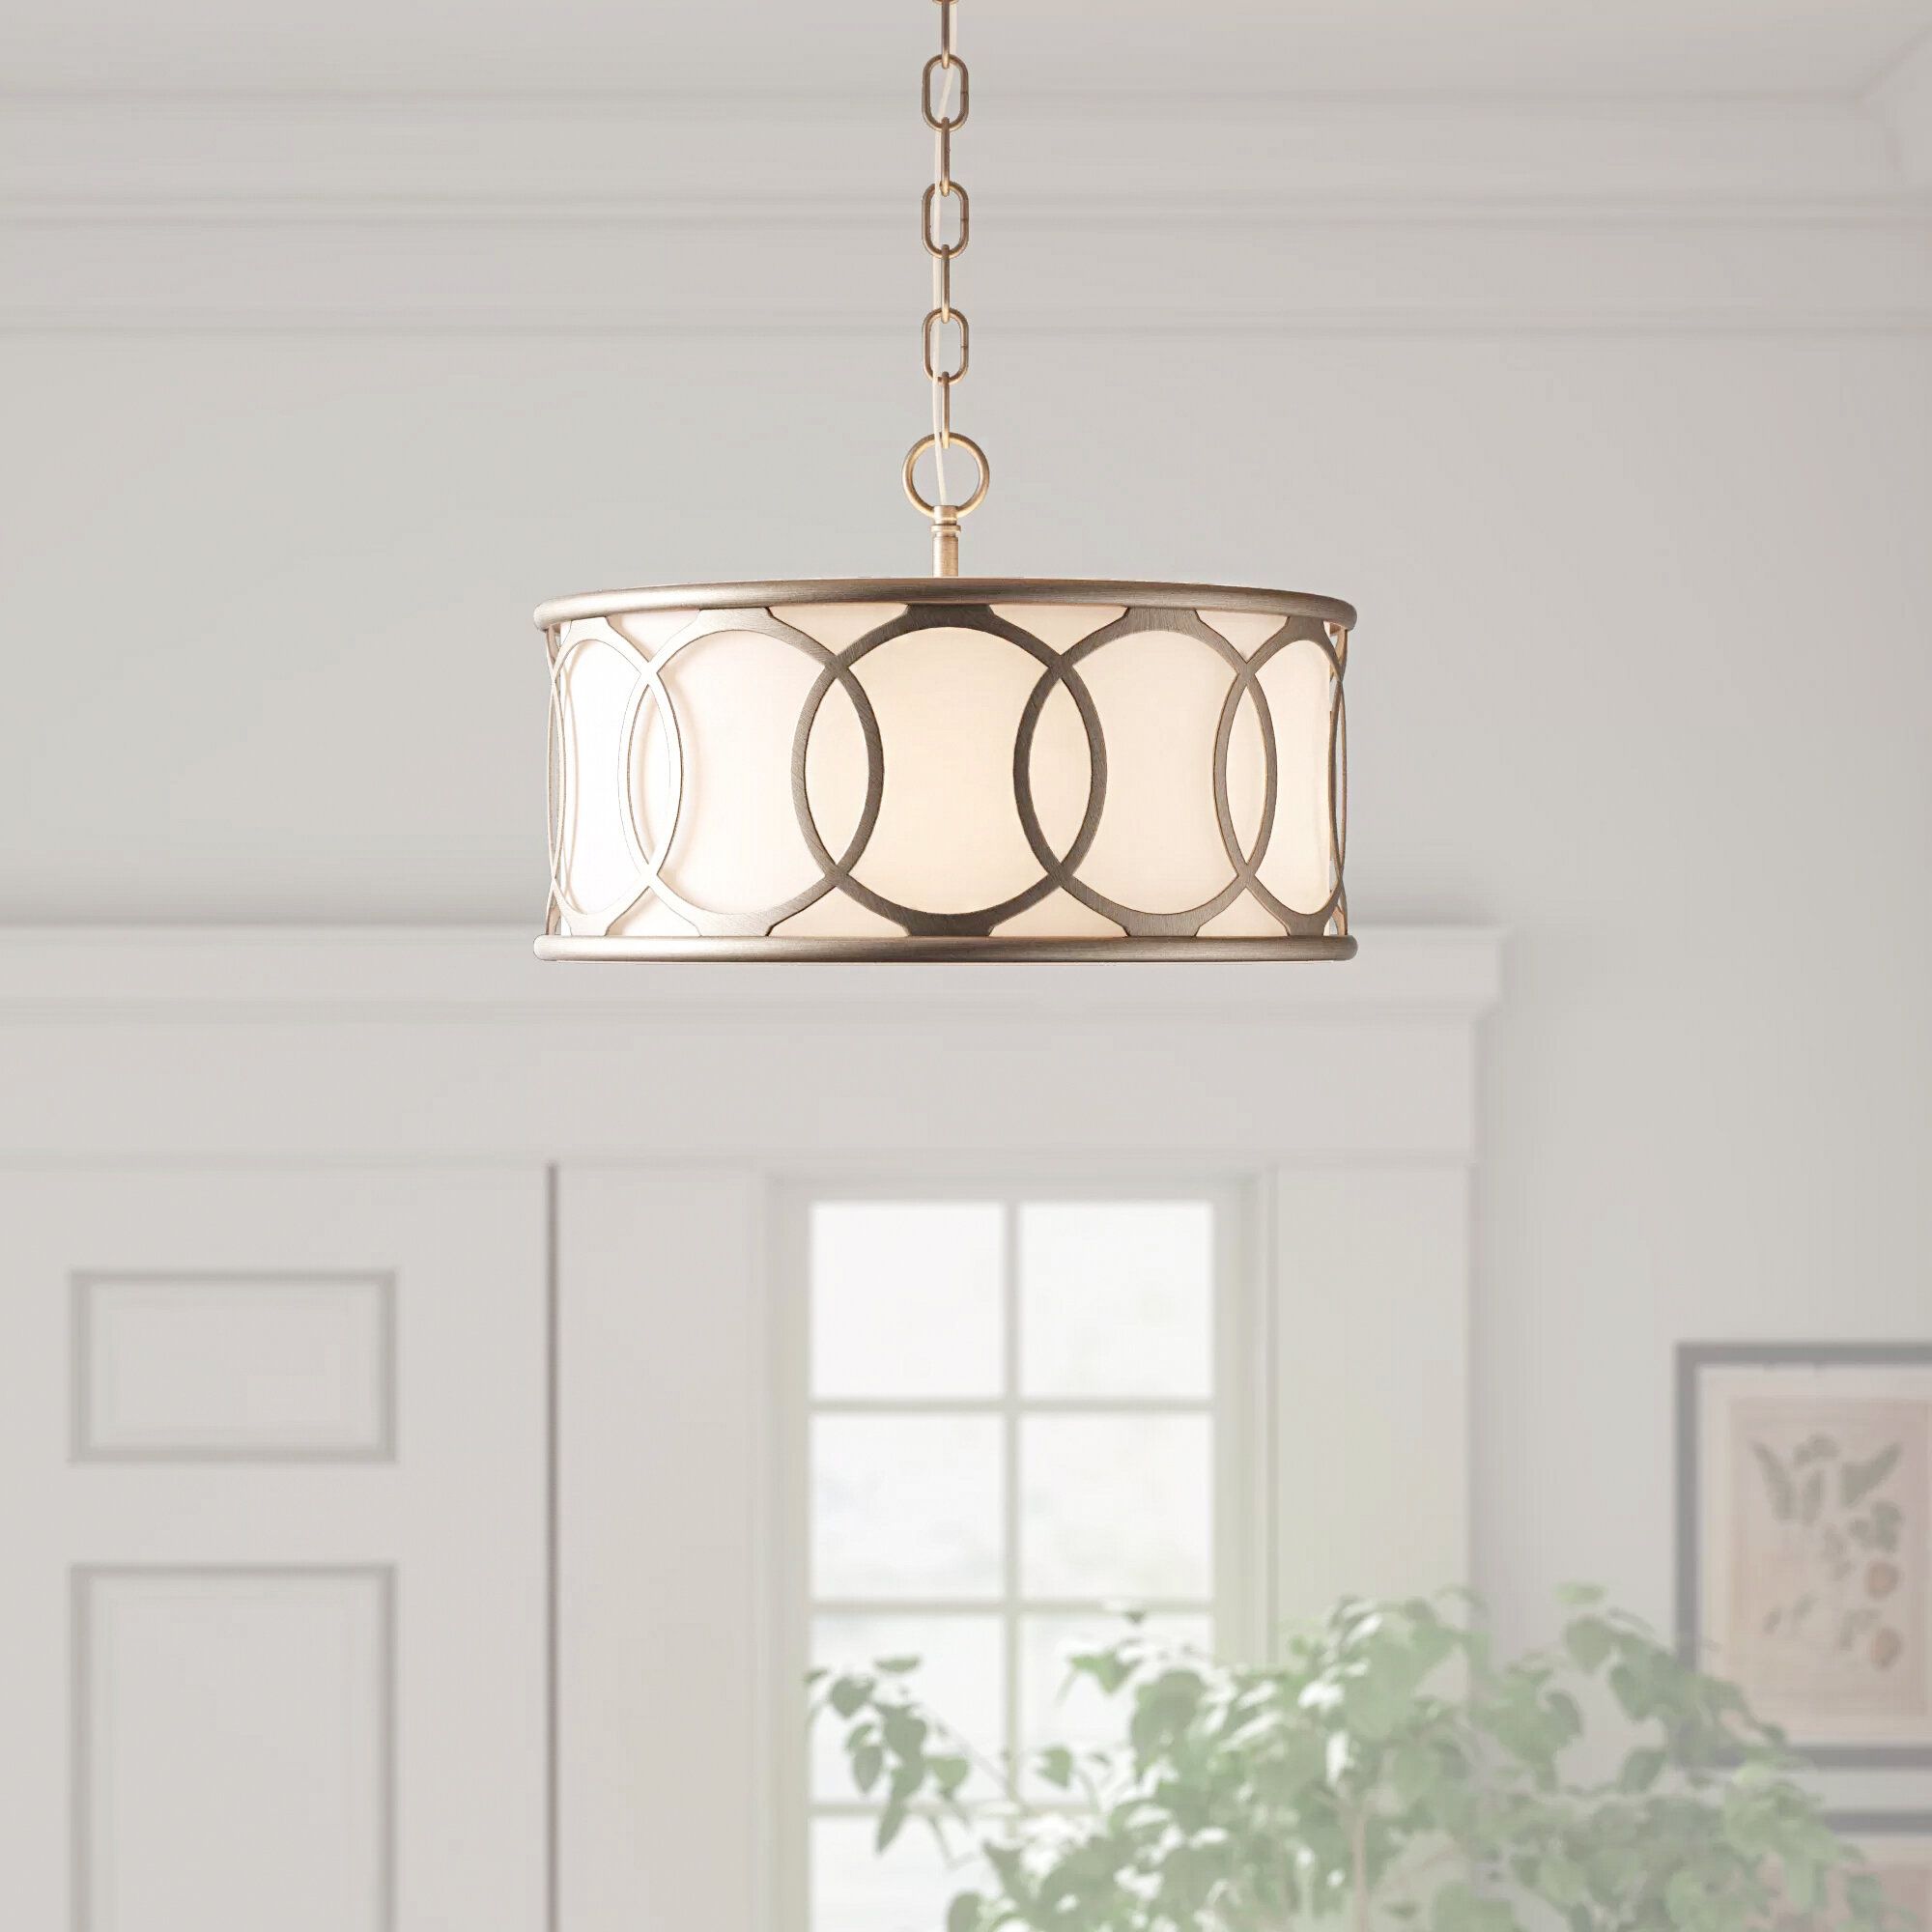 Townsend 3 Light Chandelier With Tadwick 3 Light Single Drum Chandeliers (View 7 of 30)